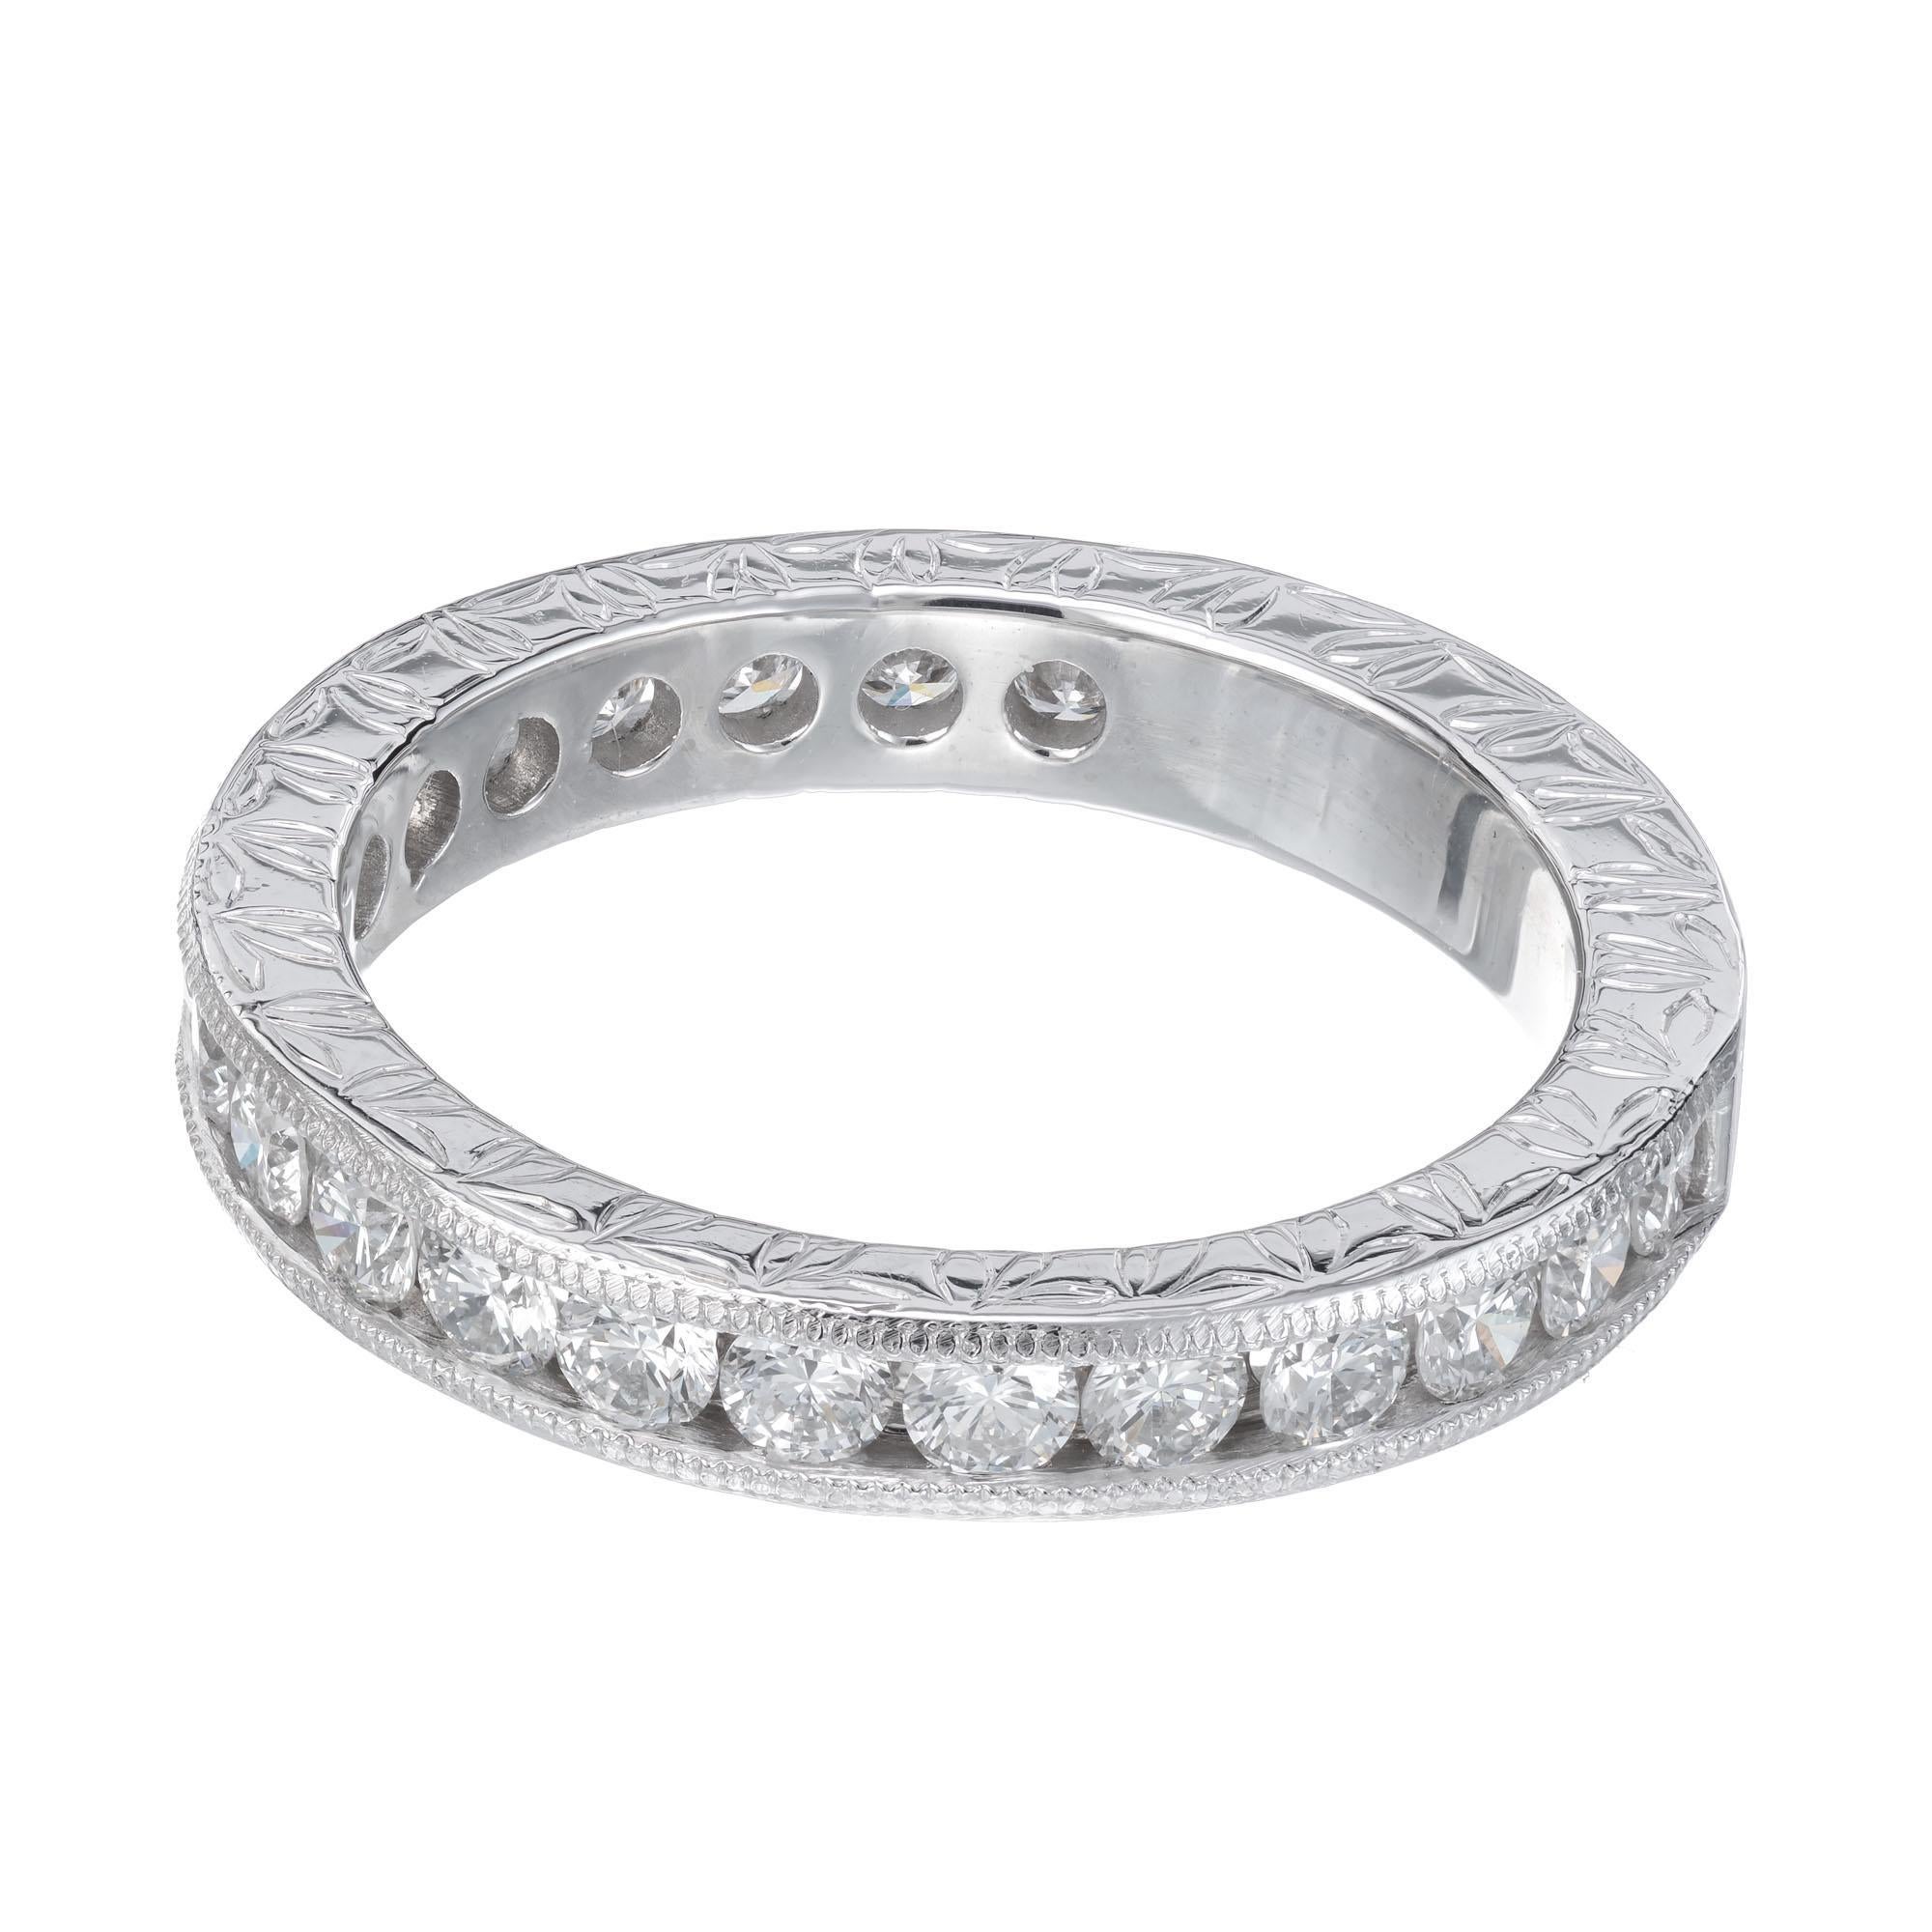 Antique Inspired diamond wedding band. 34 round brilliant cut diamonds in a platinum engraved setting with channel set diamonds and millgrain edge. Designed and crafted in the Peter Suchy workshop. This ring can be made in any size, stone size or